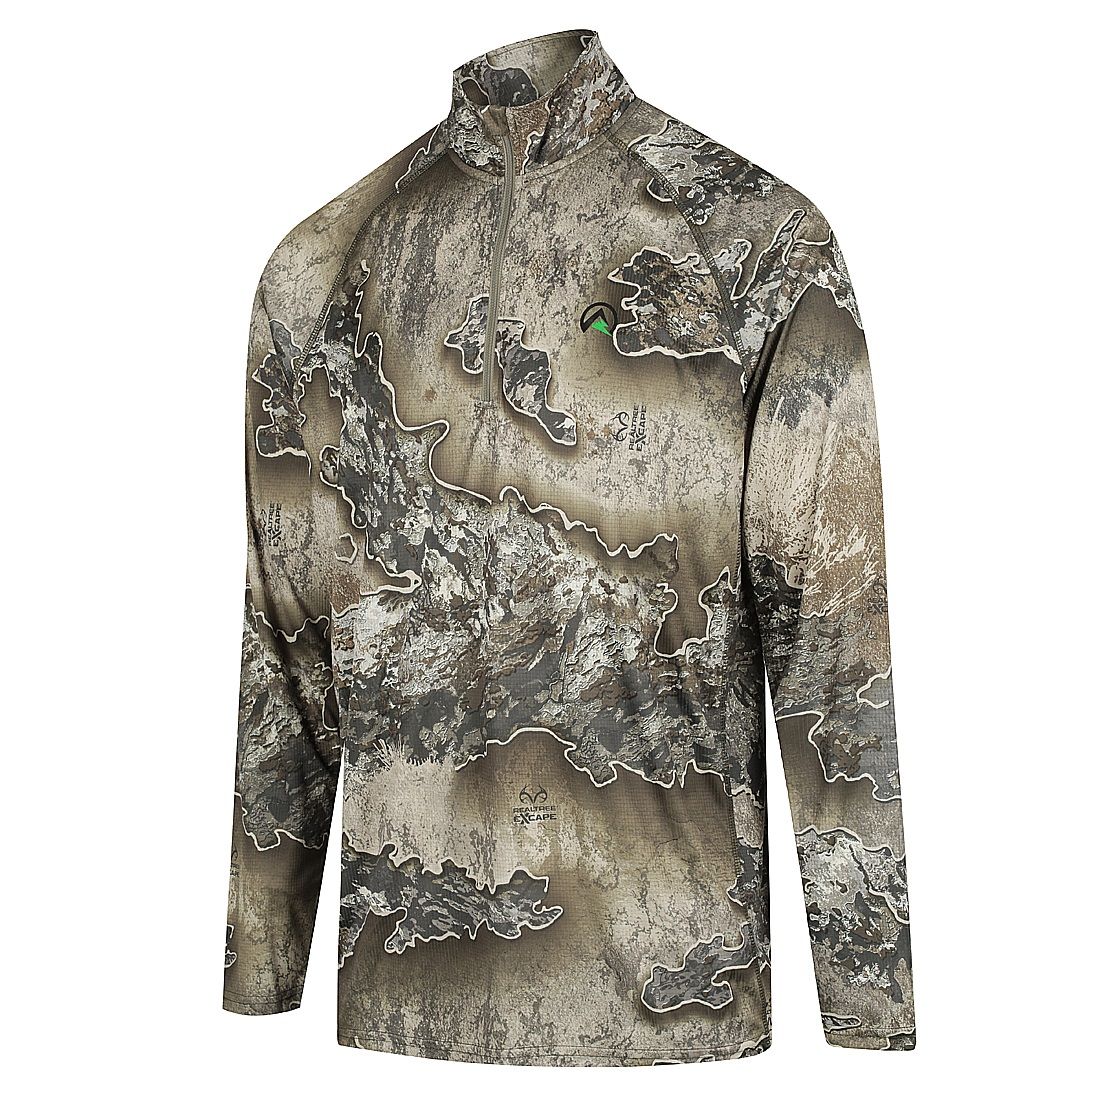 Ridgeline Mens Performance QTR Zip Top - Excape Camo - XS / EXCAPE CAMO - Mansfield Hunting & Fishing - Products to prepare for Corona Virus